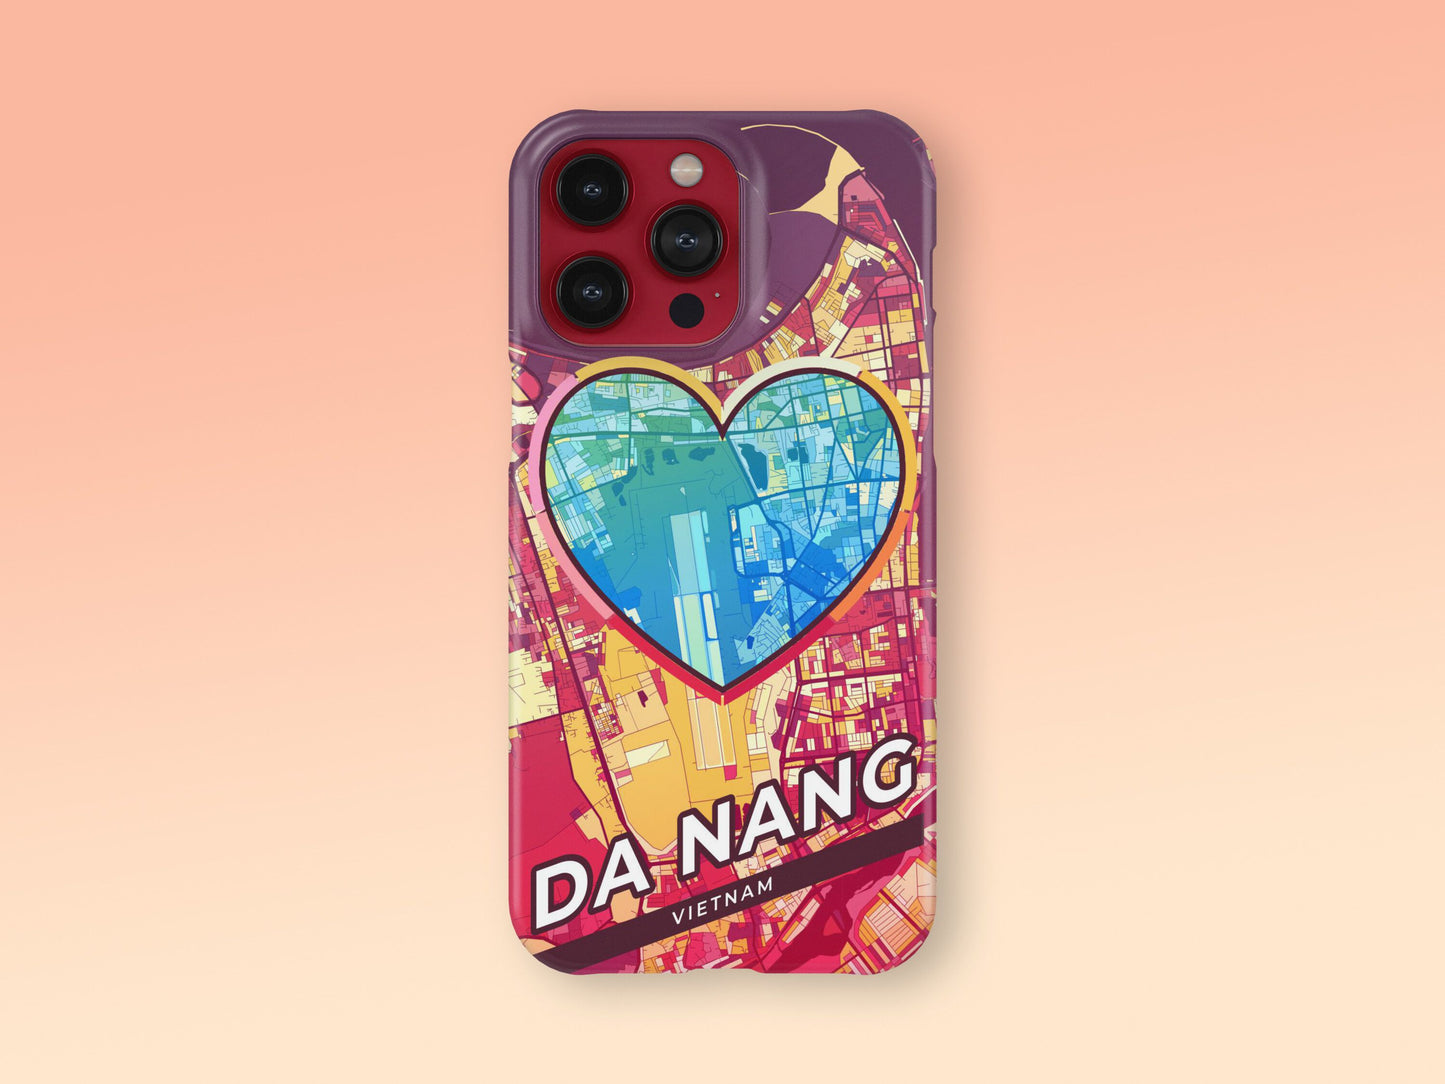 Da Nang Vietnam slim phone case with colorful icon. Birthday, wedding or housewarming gift. Couple match cases. 2